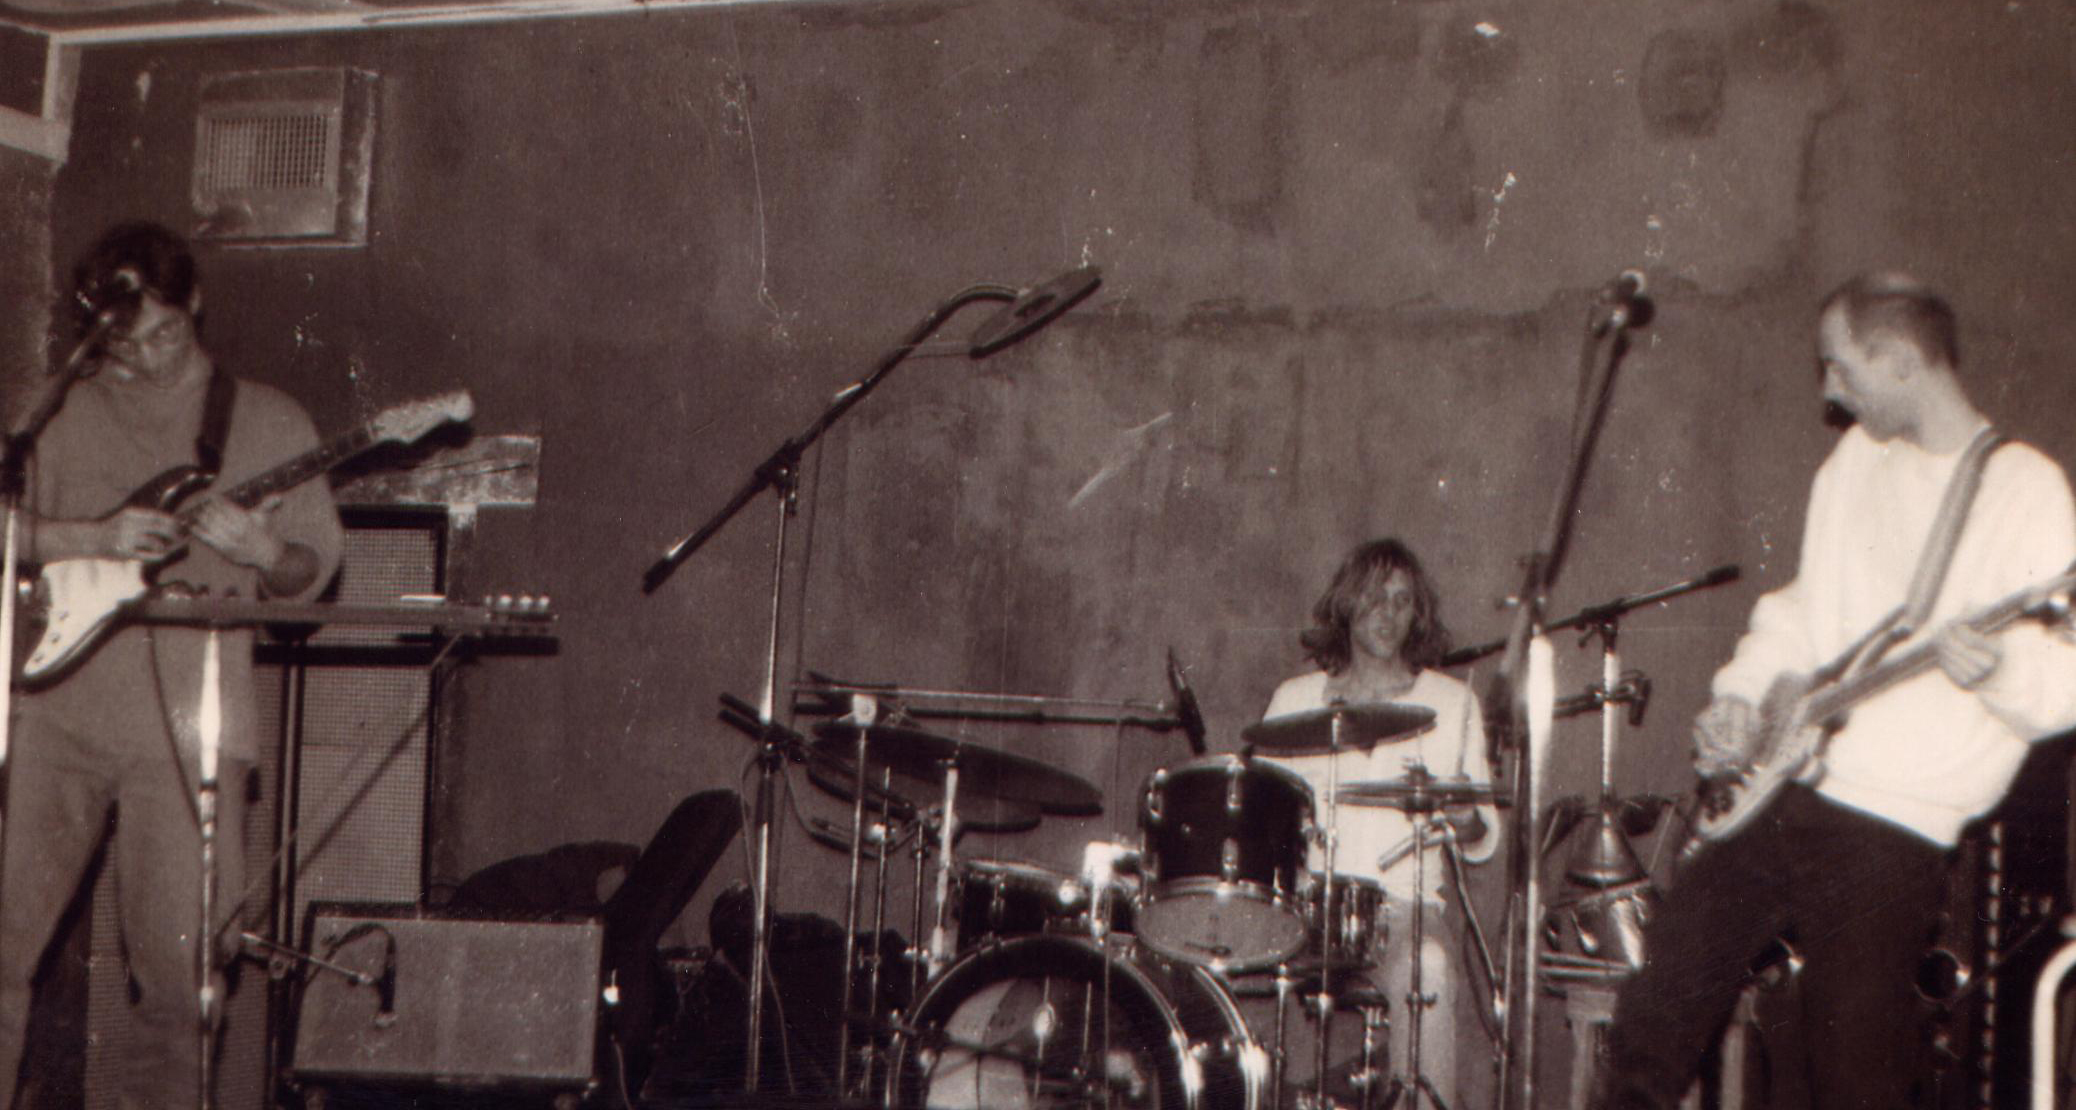 Mike Johnson playing guitar with Dave Kerman on drums and Bob Drake on bass